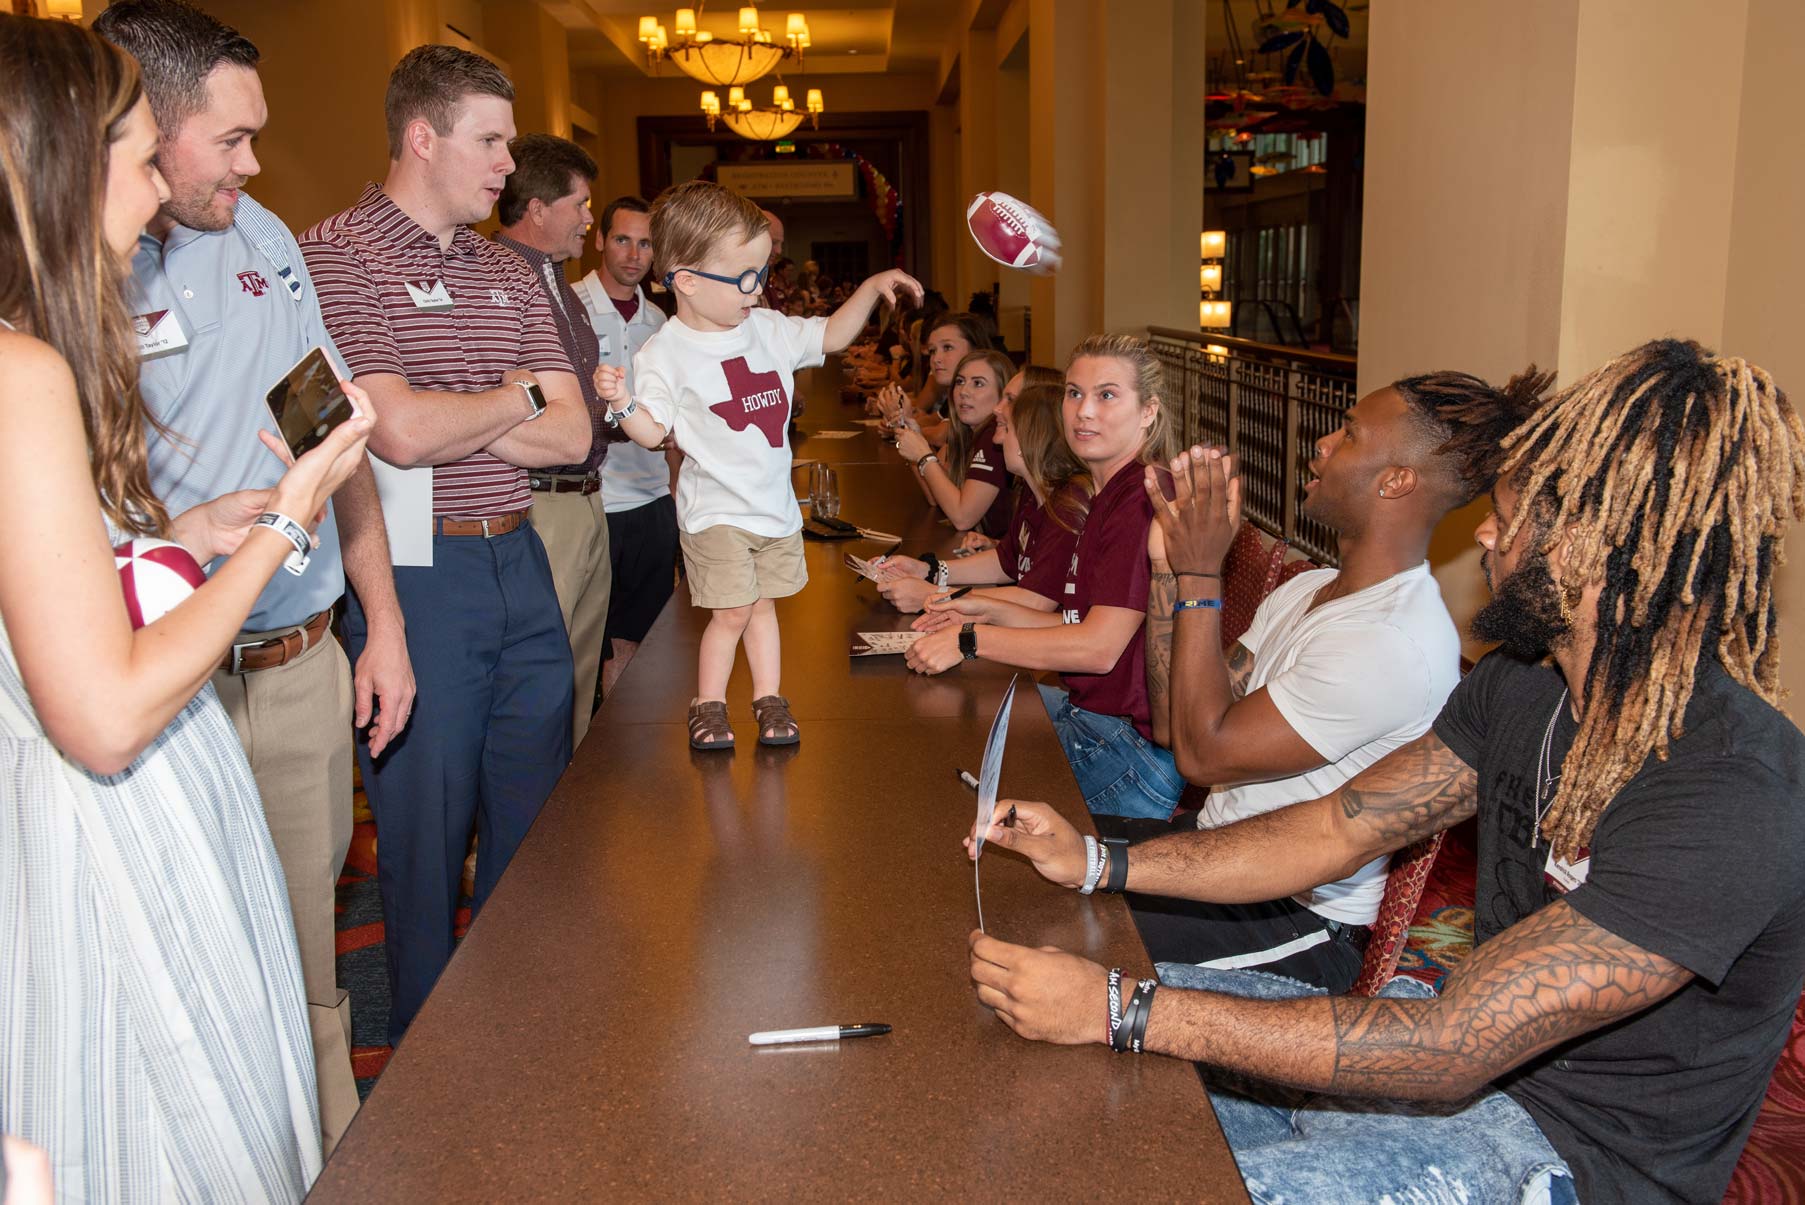 Camron Buckley sitting at a table with other students catching a ball from a child